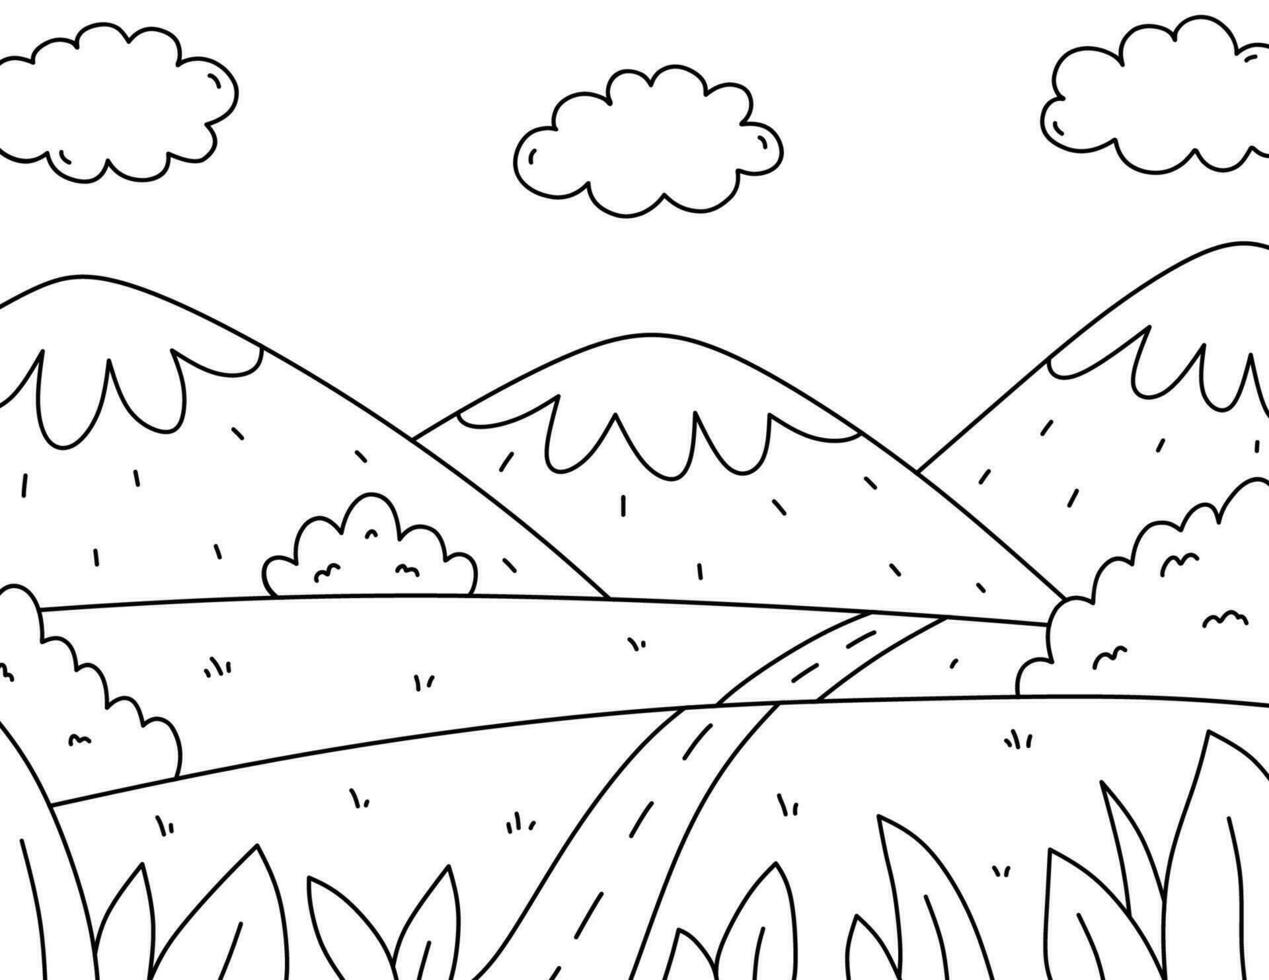 Cute kids coloring page. Landscape with mountains, clouds, field, bushes and road. Vector hand-drawn illustration in doodle style. Cartoon coloring book for children.